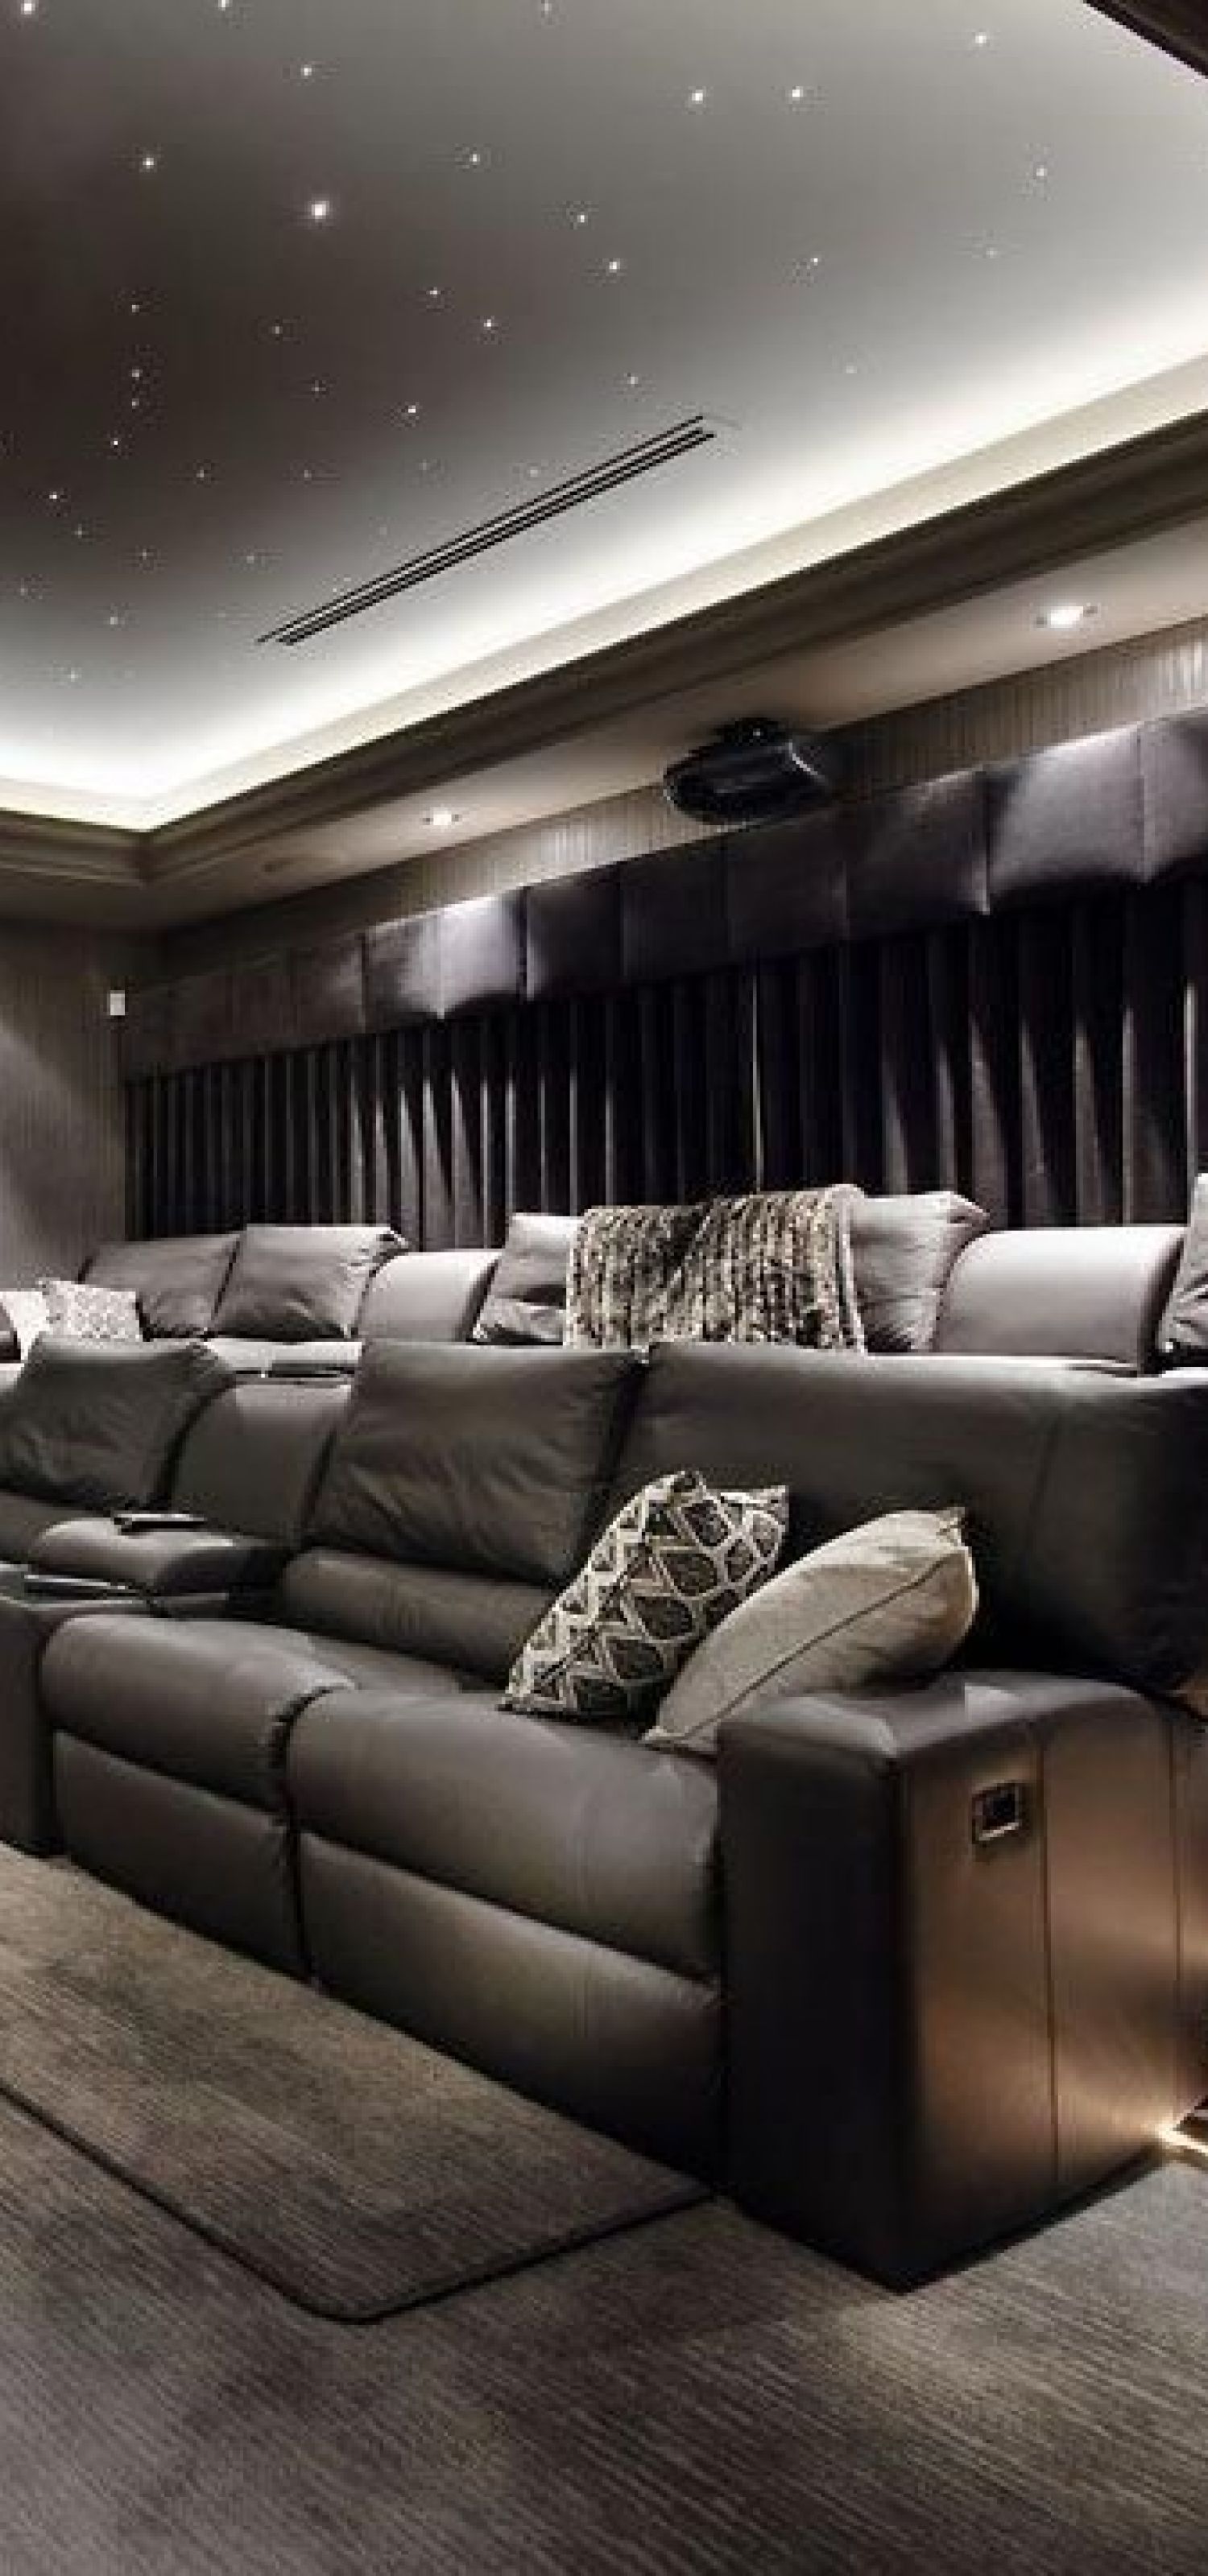 Custom theater seating in a dedicated theater room